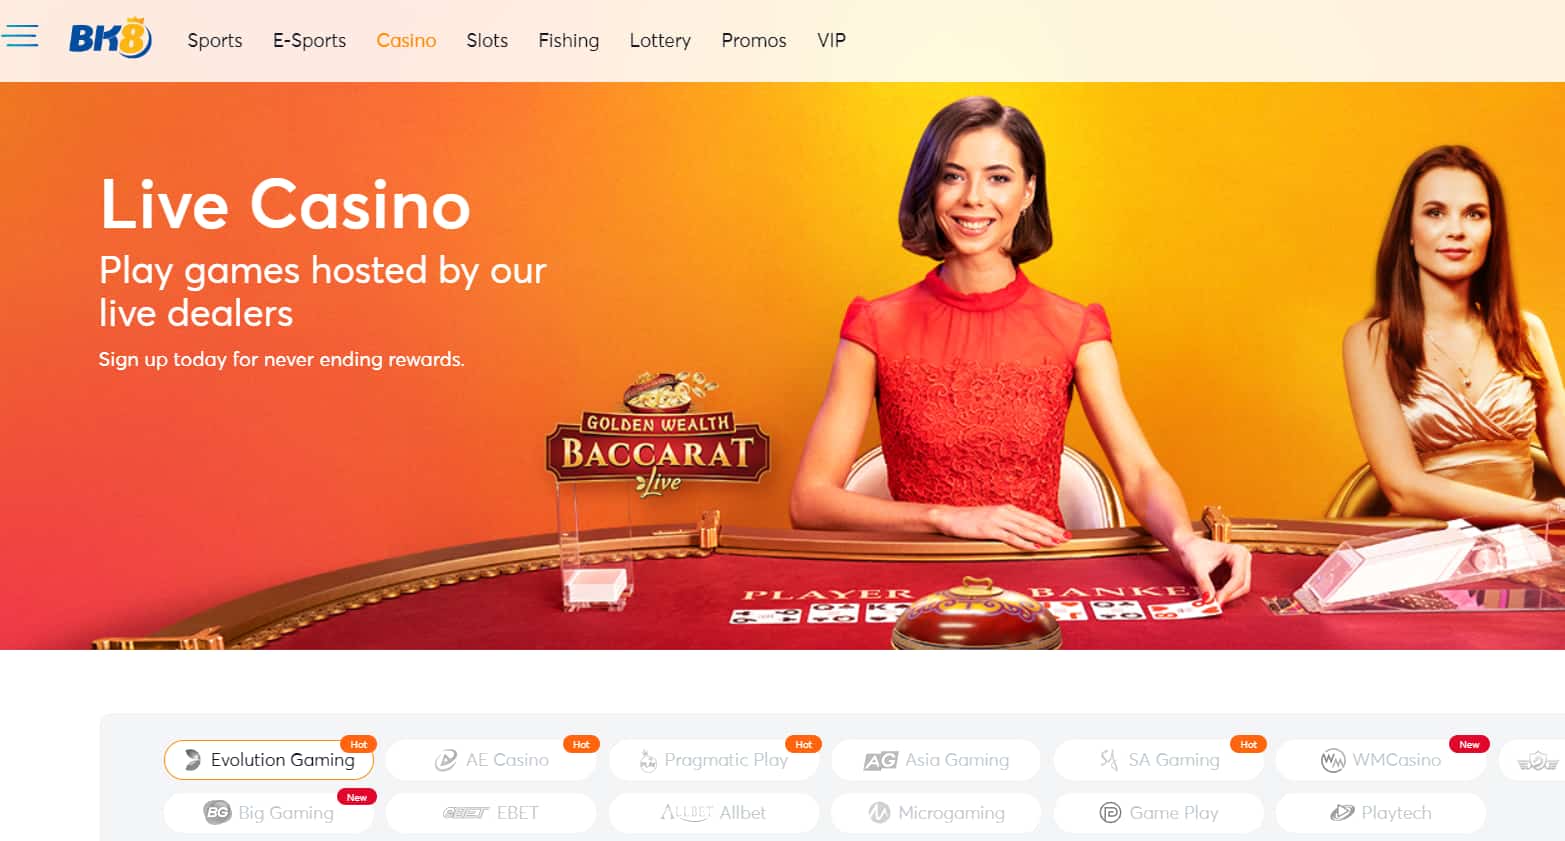 Bet365: The Casino Site That Offers The Best Experience For Indian Players